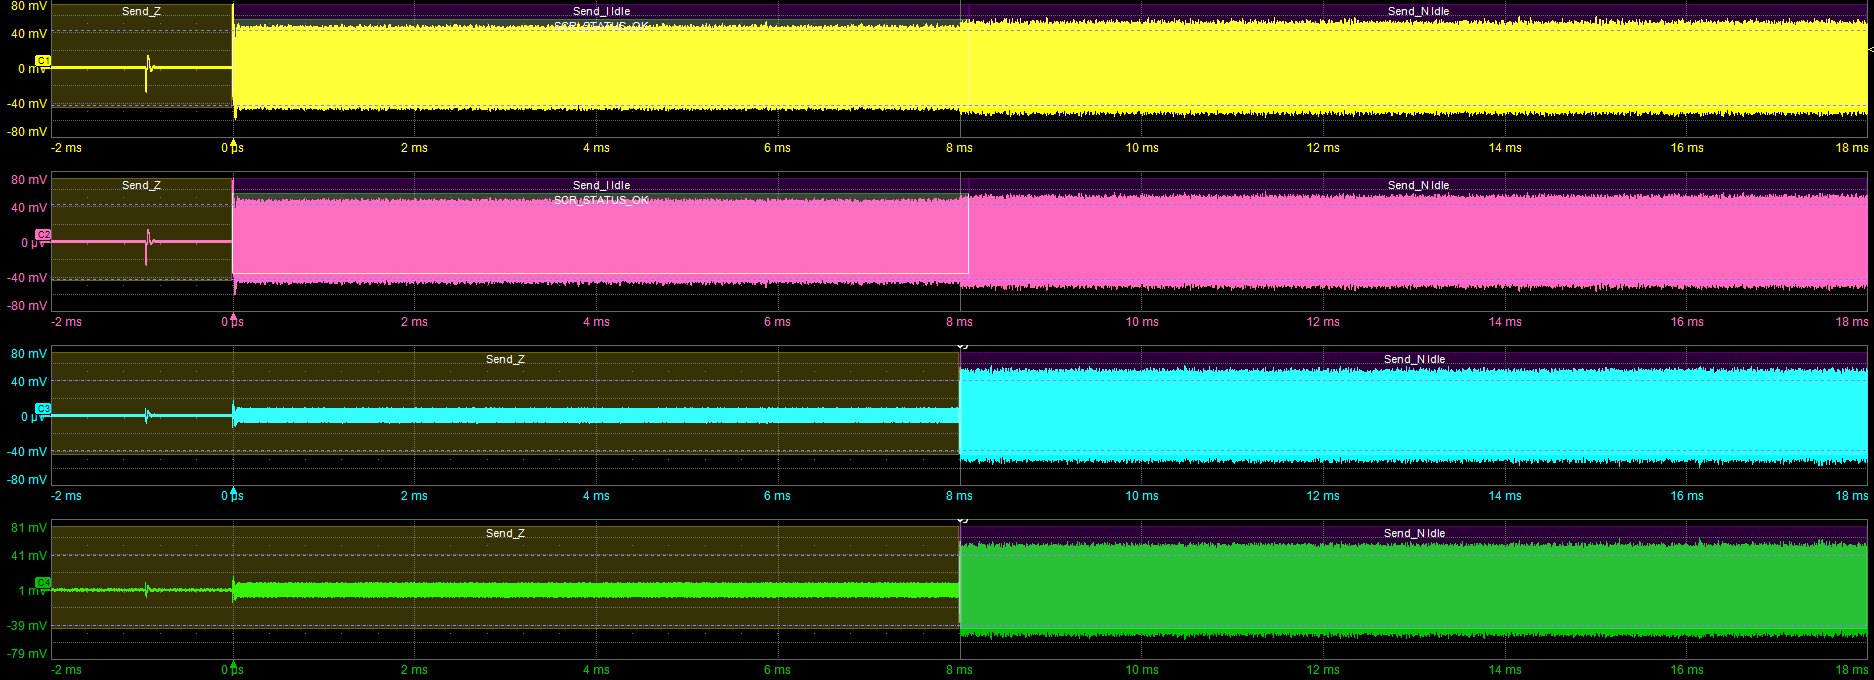 100Base-T1 link startup showing Master (yellow, pink) and Slave (blue, green) switching from SEND_Z to SEND_I and SEND_N.